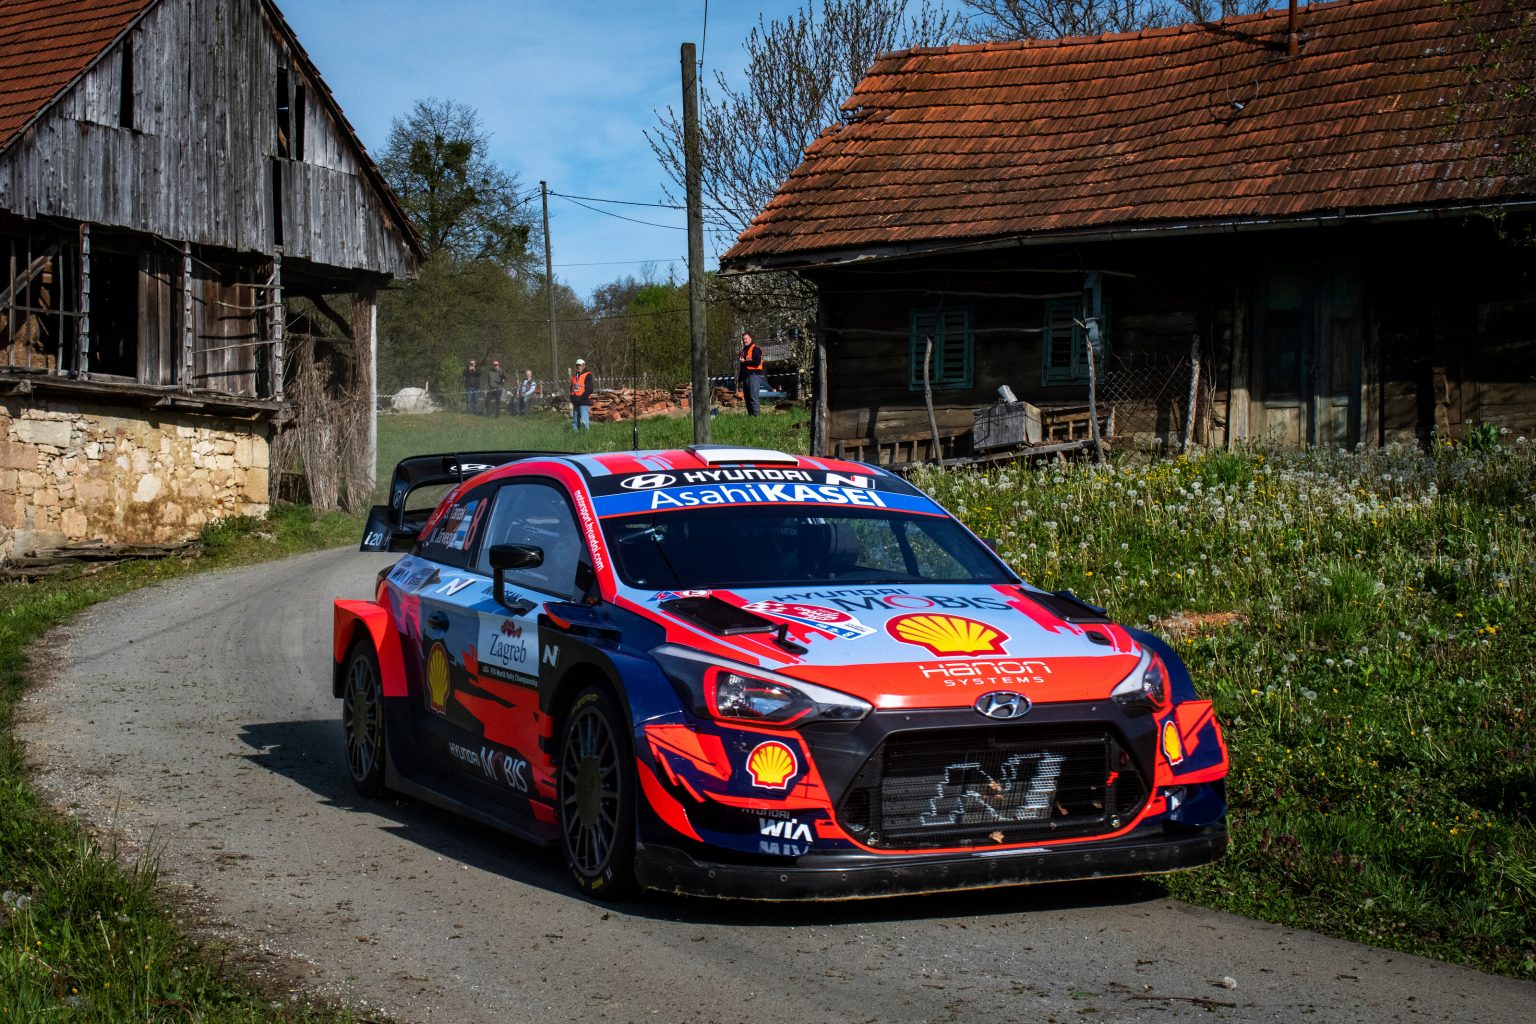 Ott Tanak (EST) and Martin Jarveoja (EST) of Team Hyundai Shell Mobis perform during World Rally Championship Croatia in Zagreb, Croatia on April 25, 2021 // Jaanus Ree/Red Bull Content Pool // SI202104250206 // Usage for editorial use only //